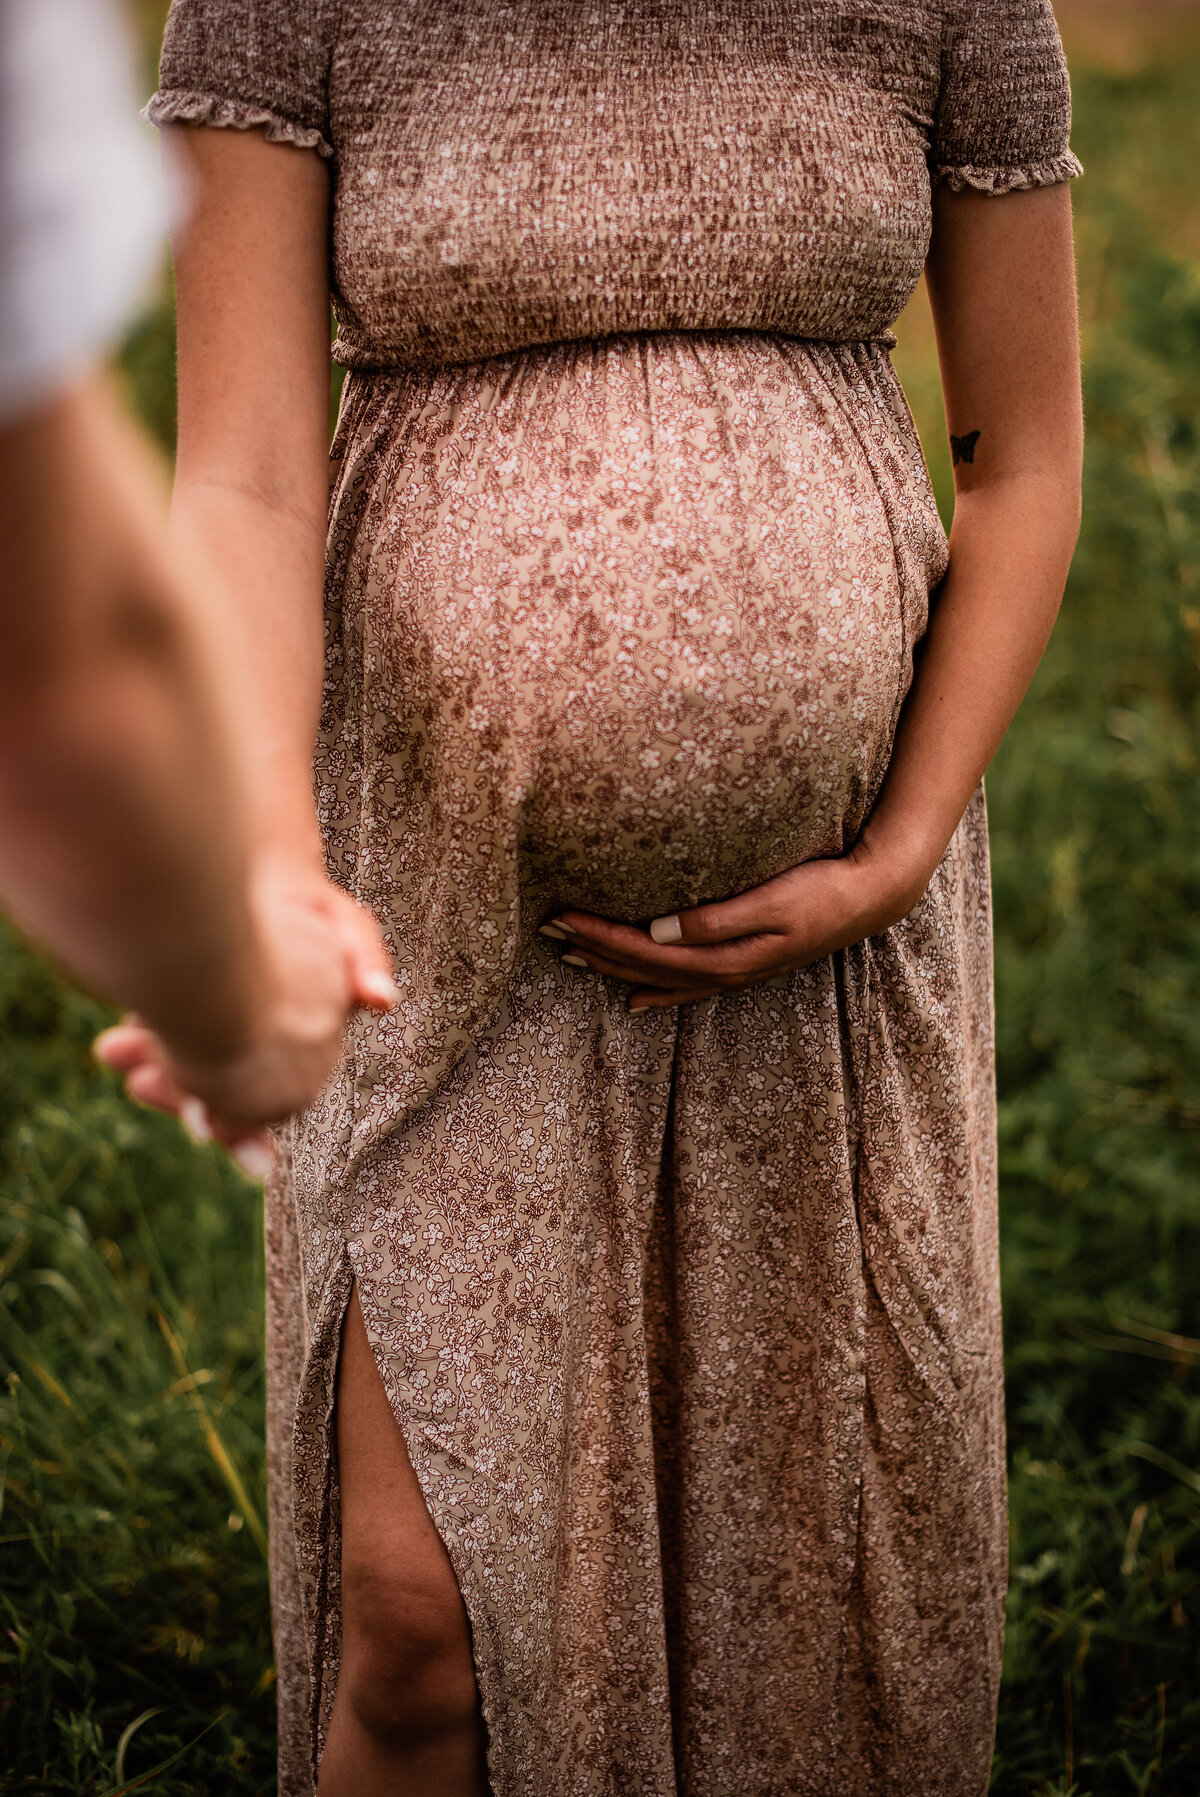 A close up picture of a mom to be holding her belly while wearing a floral dress.